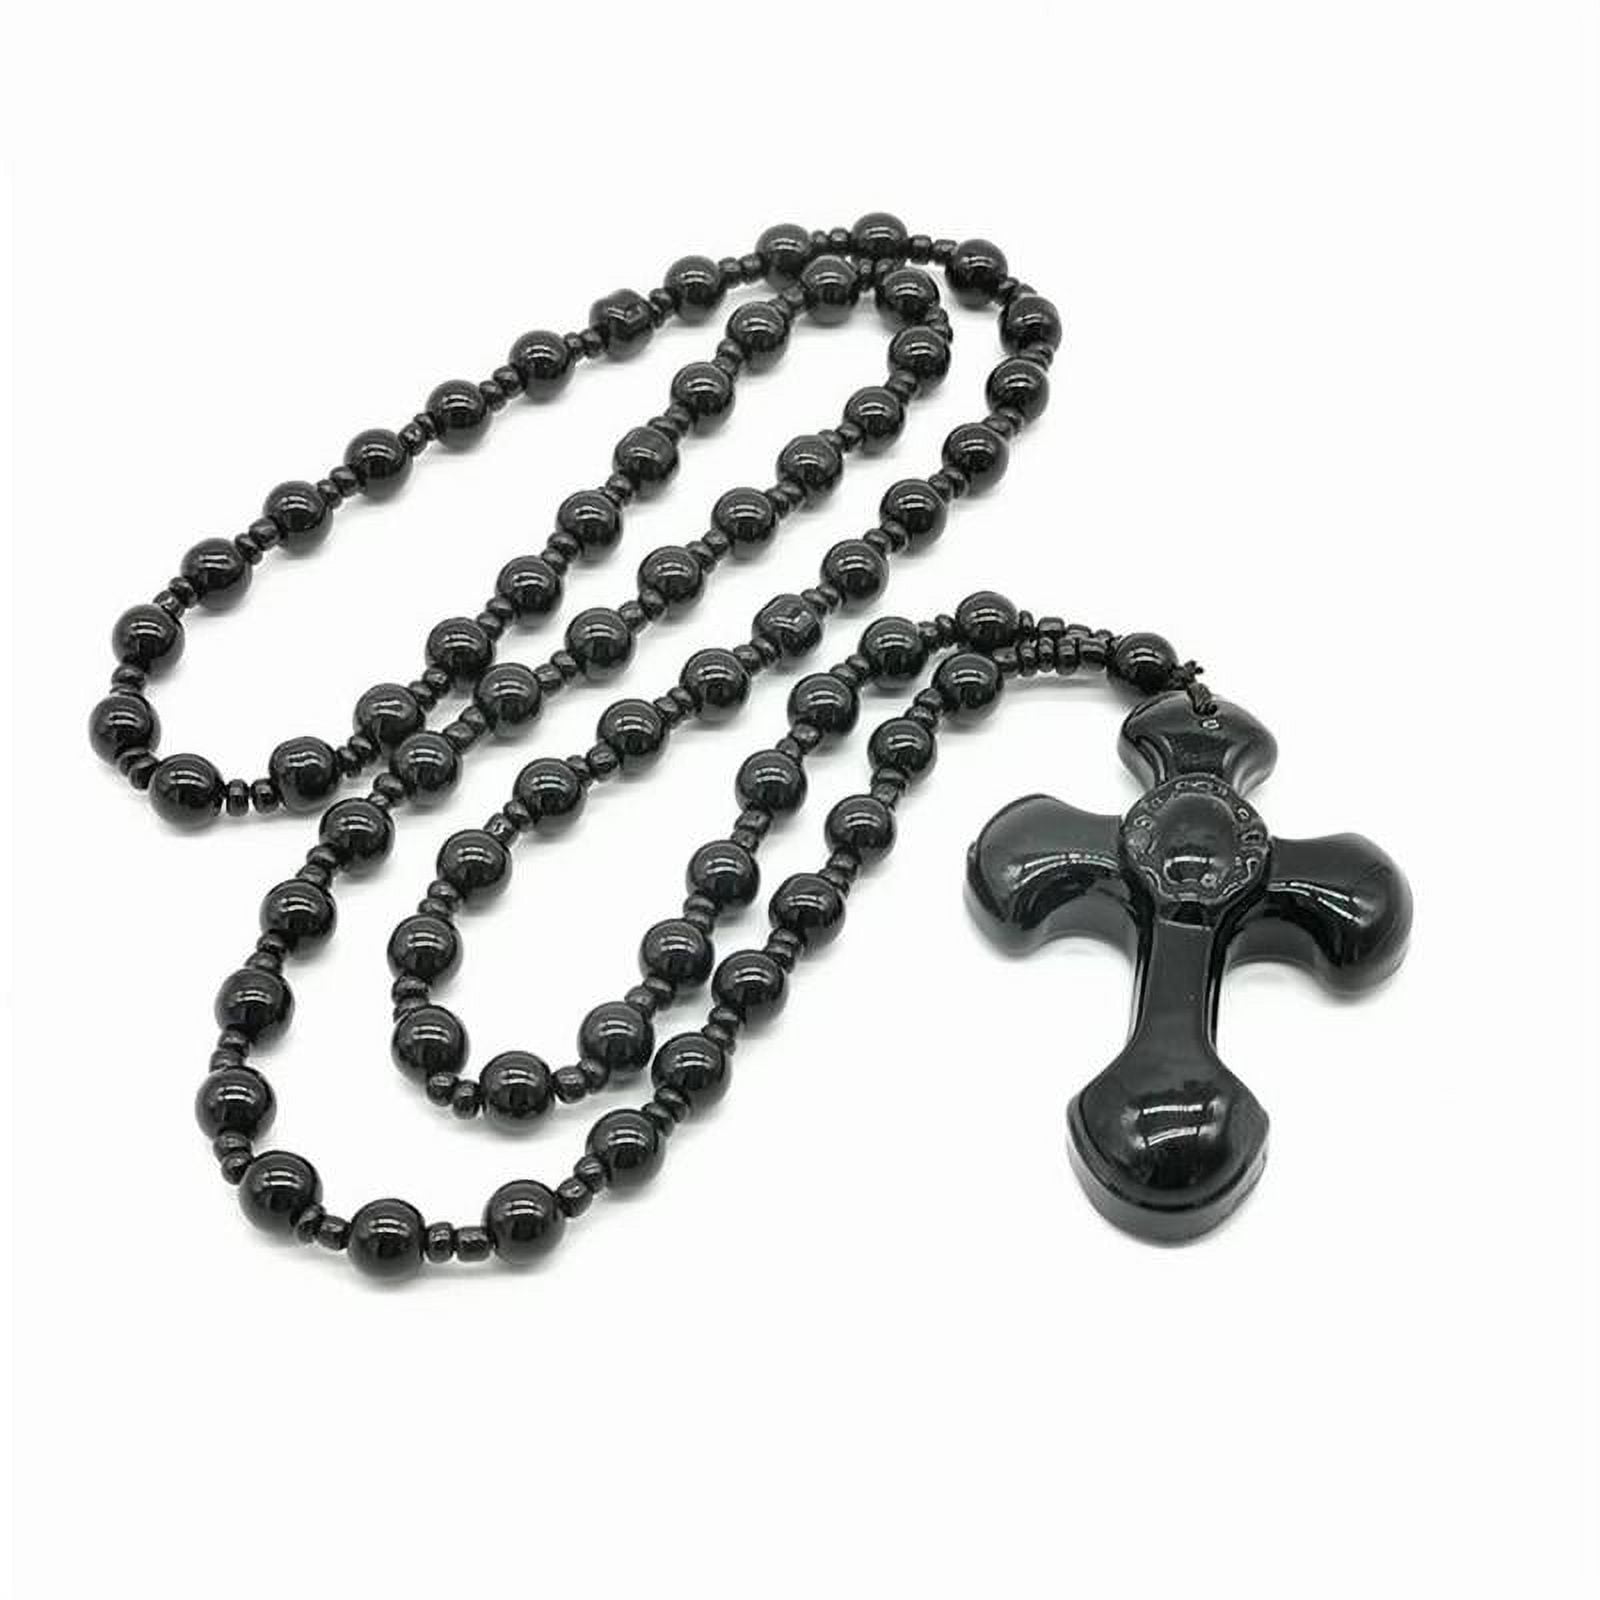 Black Beads Cross Rosary Necklaces for Men, Male Power Balance Hematite  Chain Necklace, Religious Faith Prayer Jewelry - AliExpress